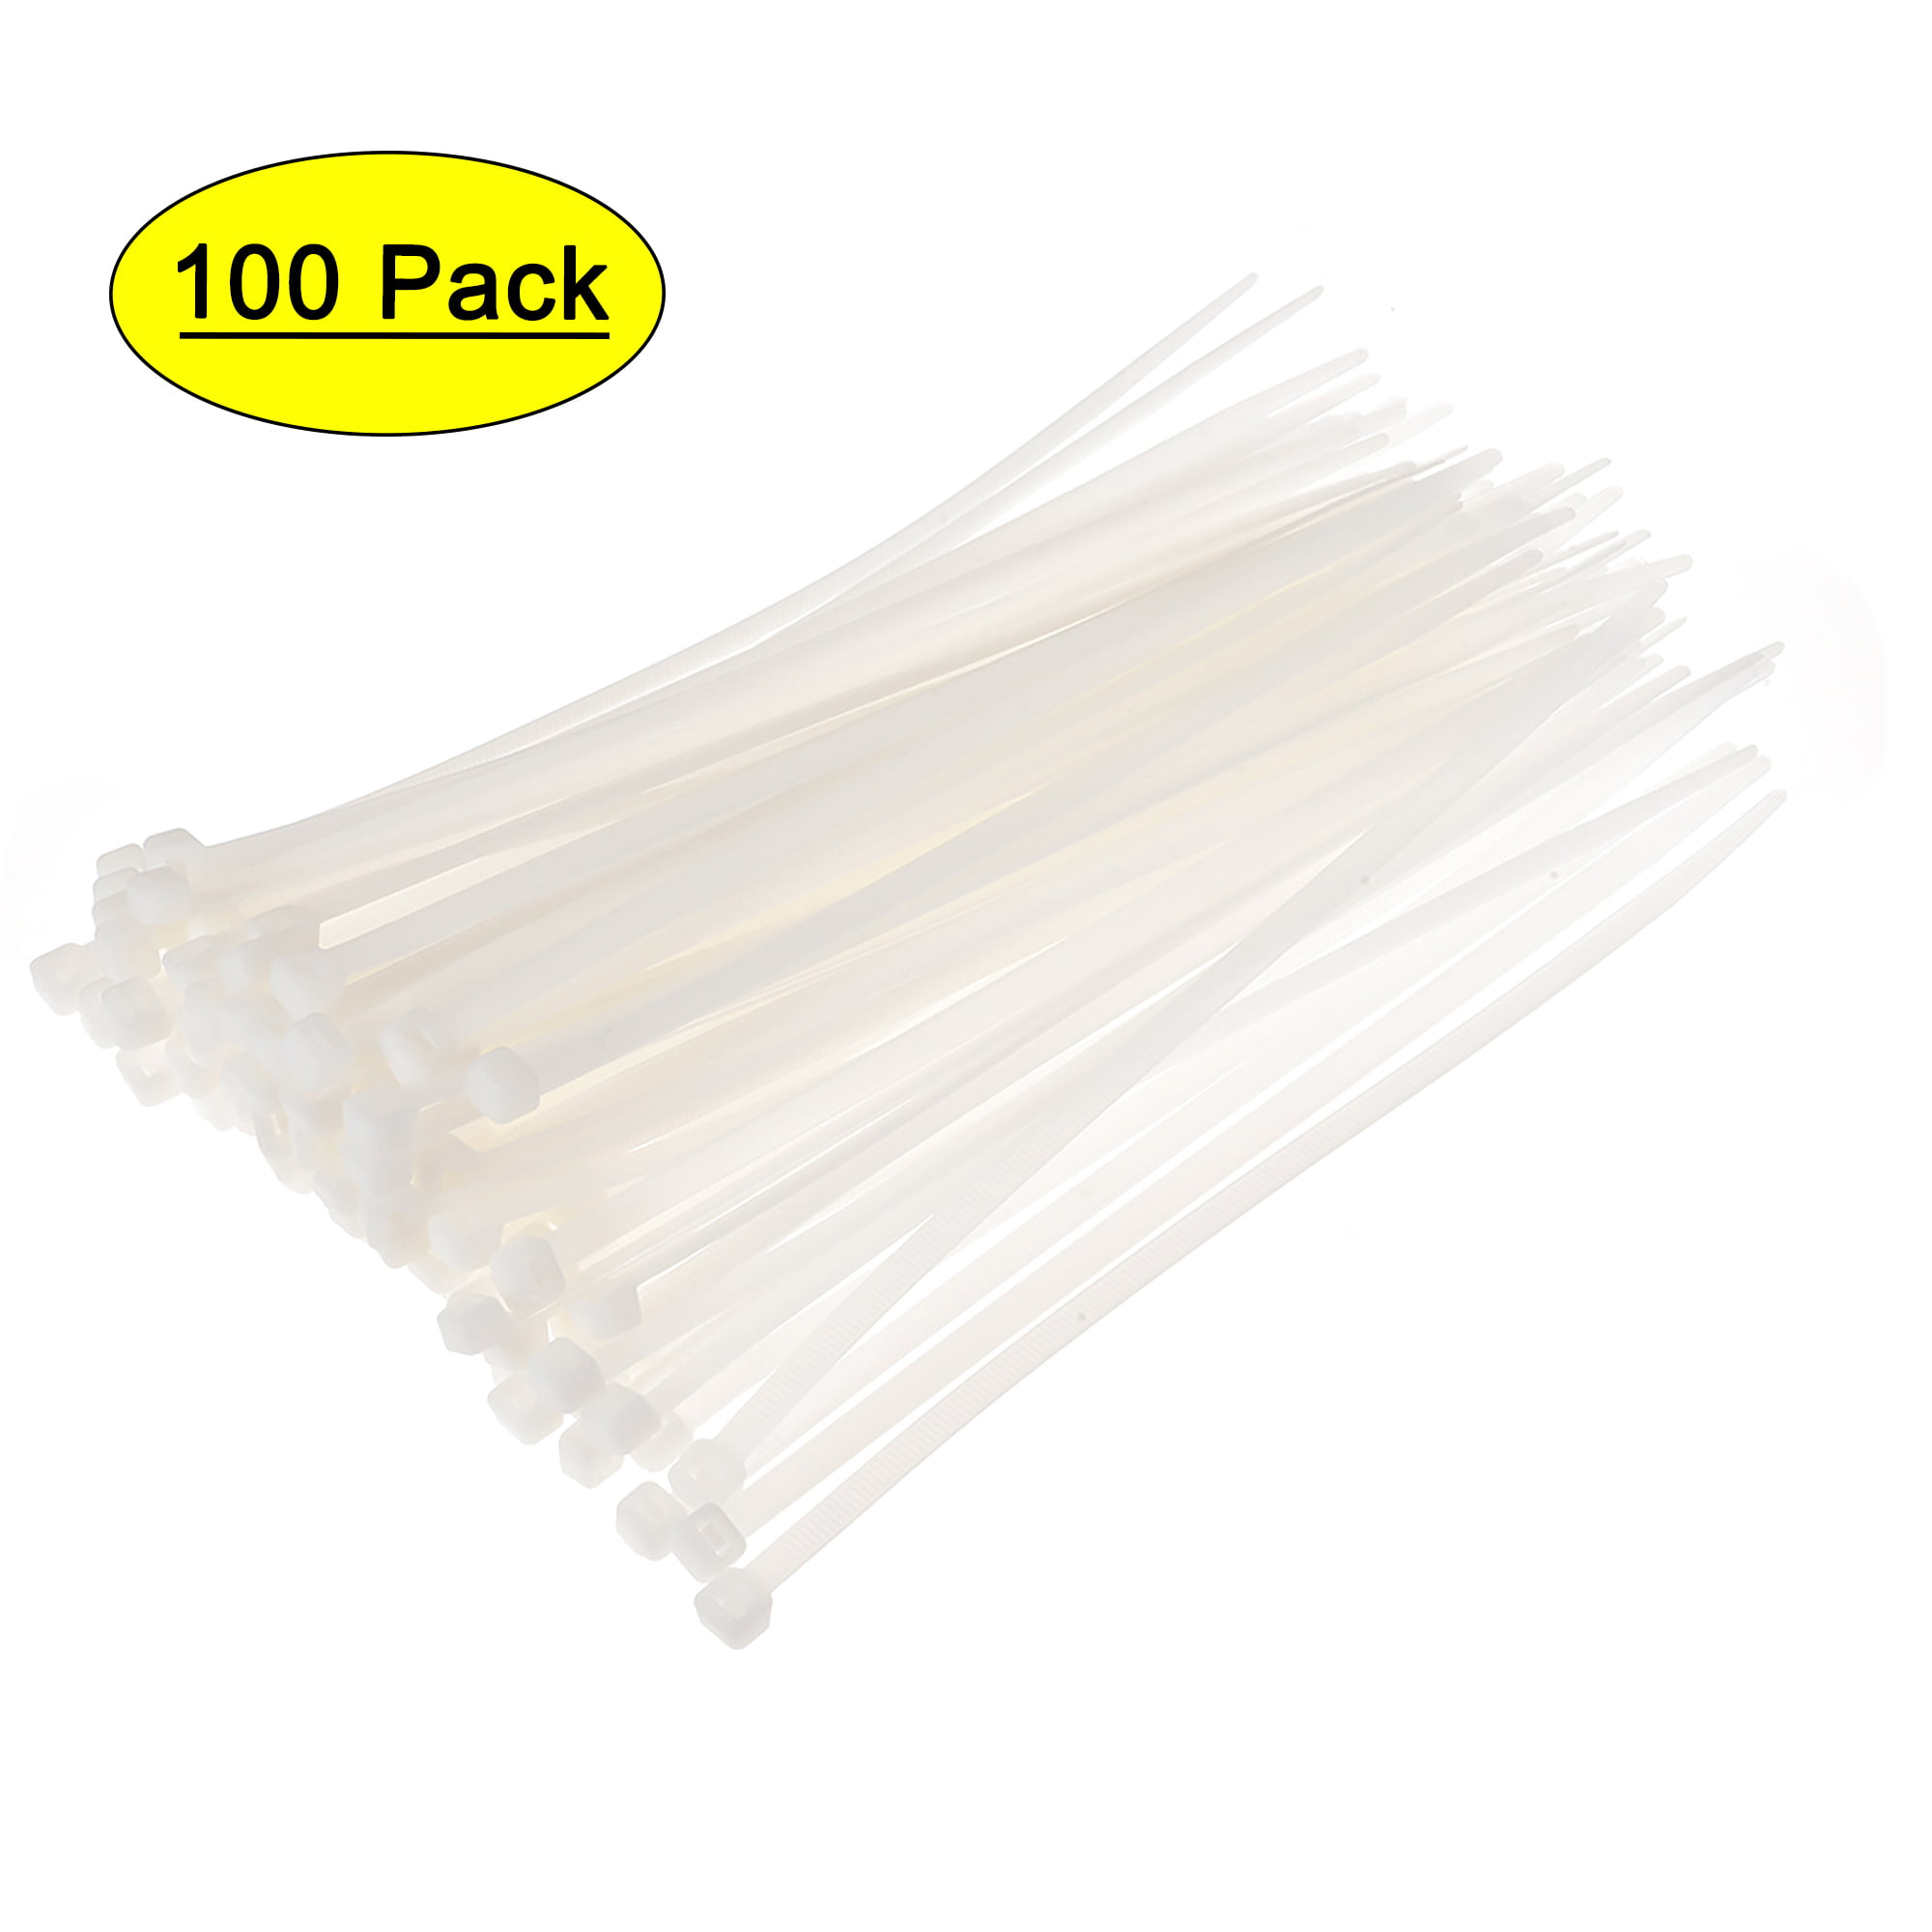 2.4 inch Length Uxcell Cord Wire Strap Nylon Cable Tie White 1000pcs